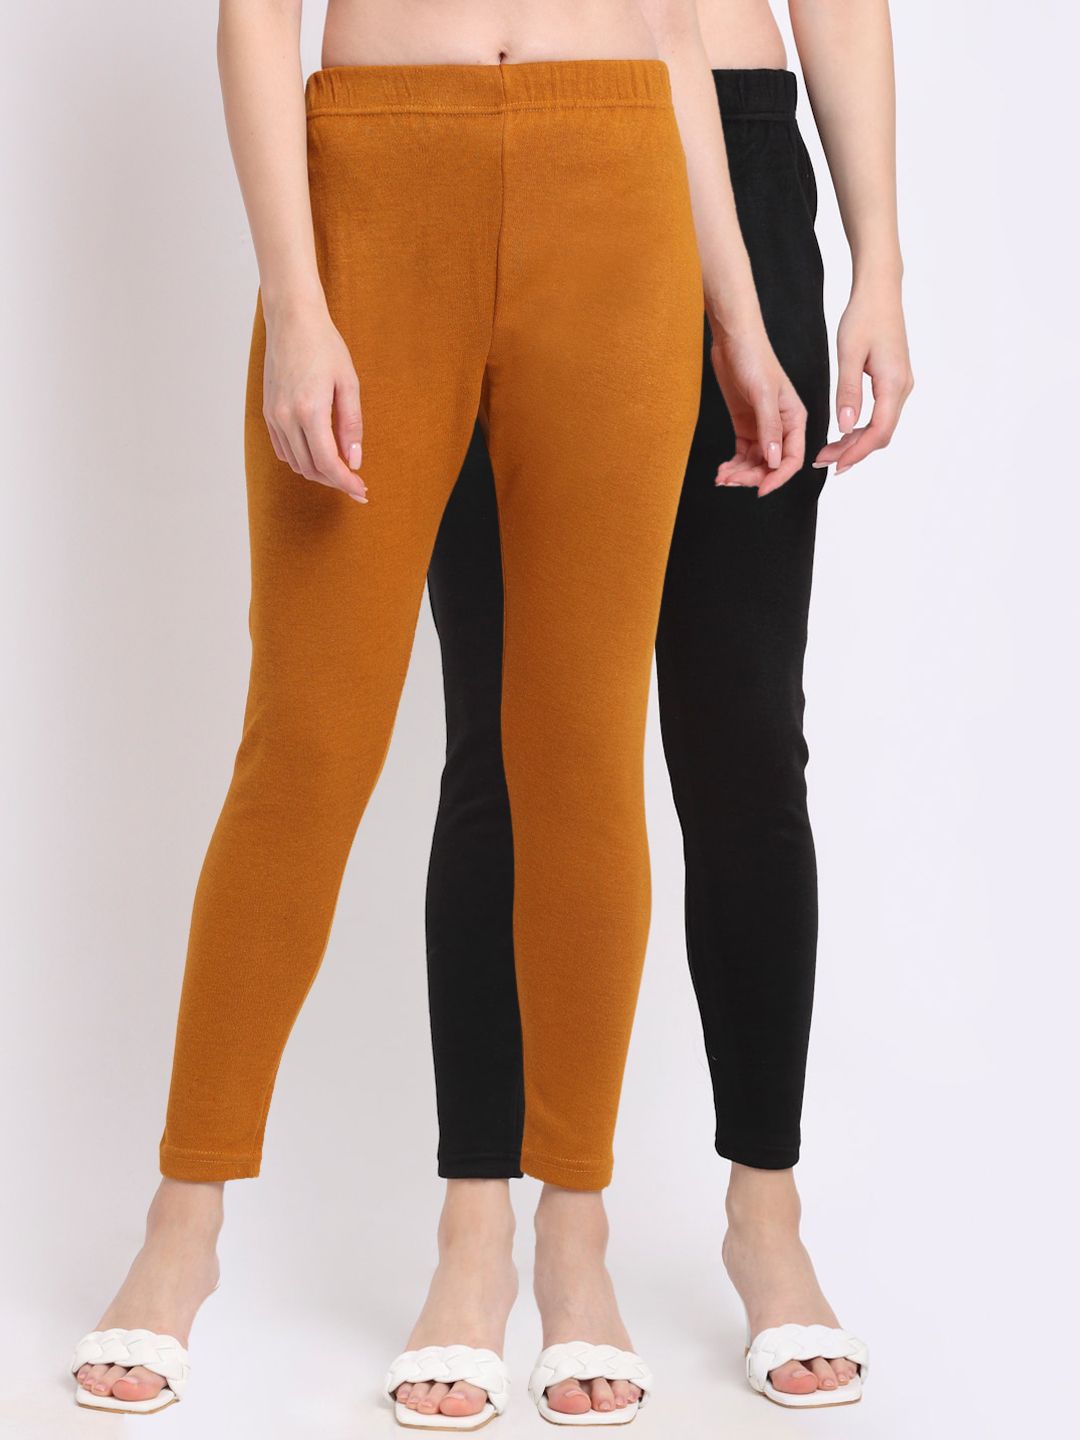 TAG 7 Women Pack Of 2 Black & Mustard Solid Ankle-Length Leggings Price in India